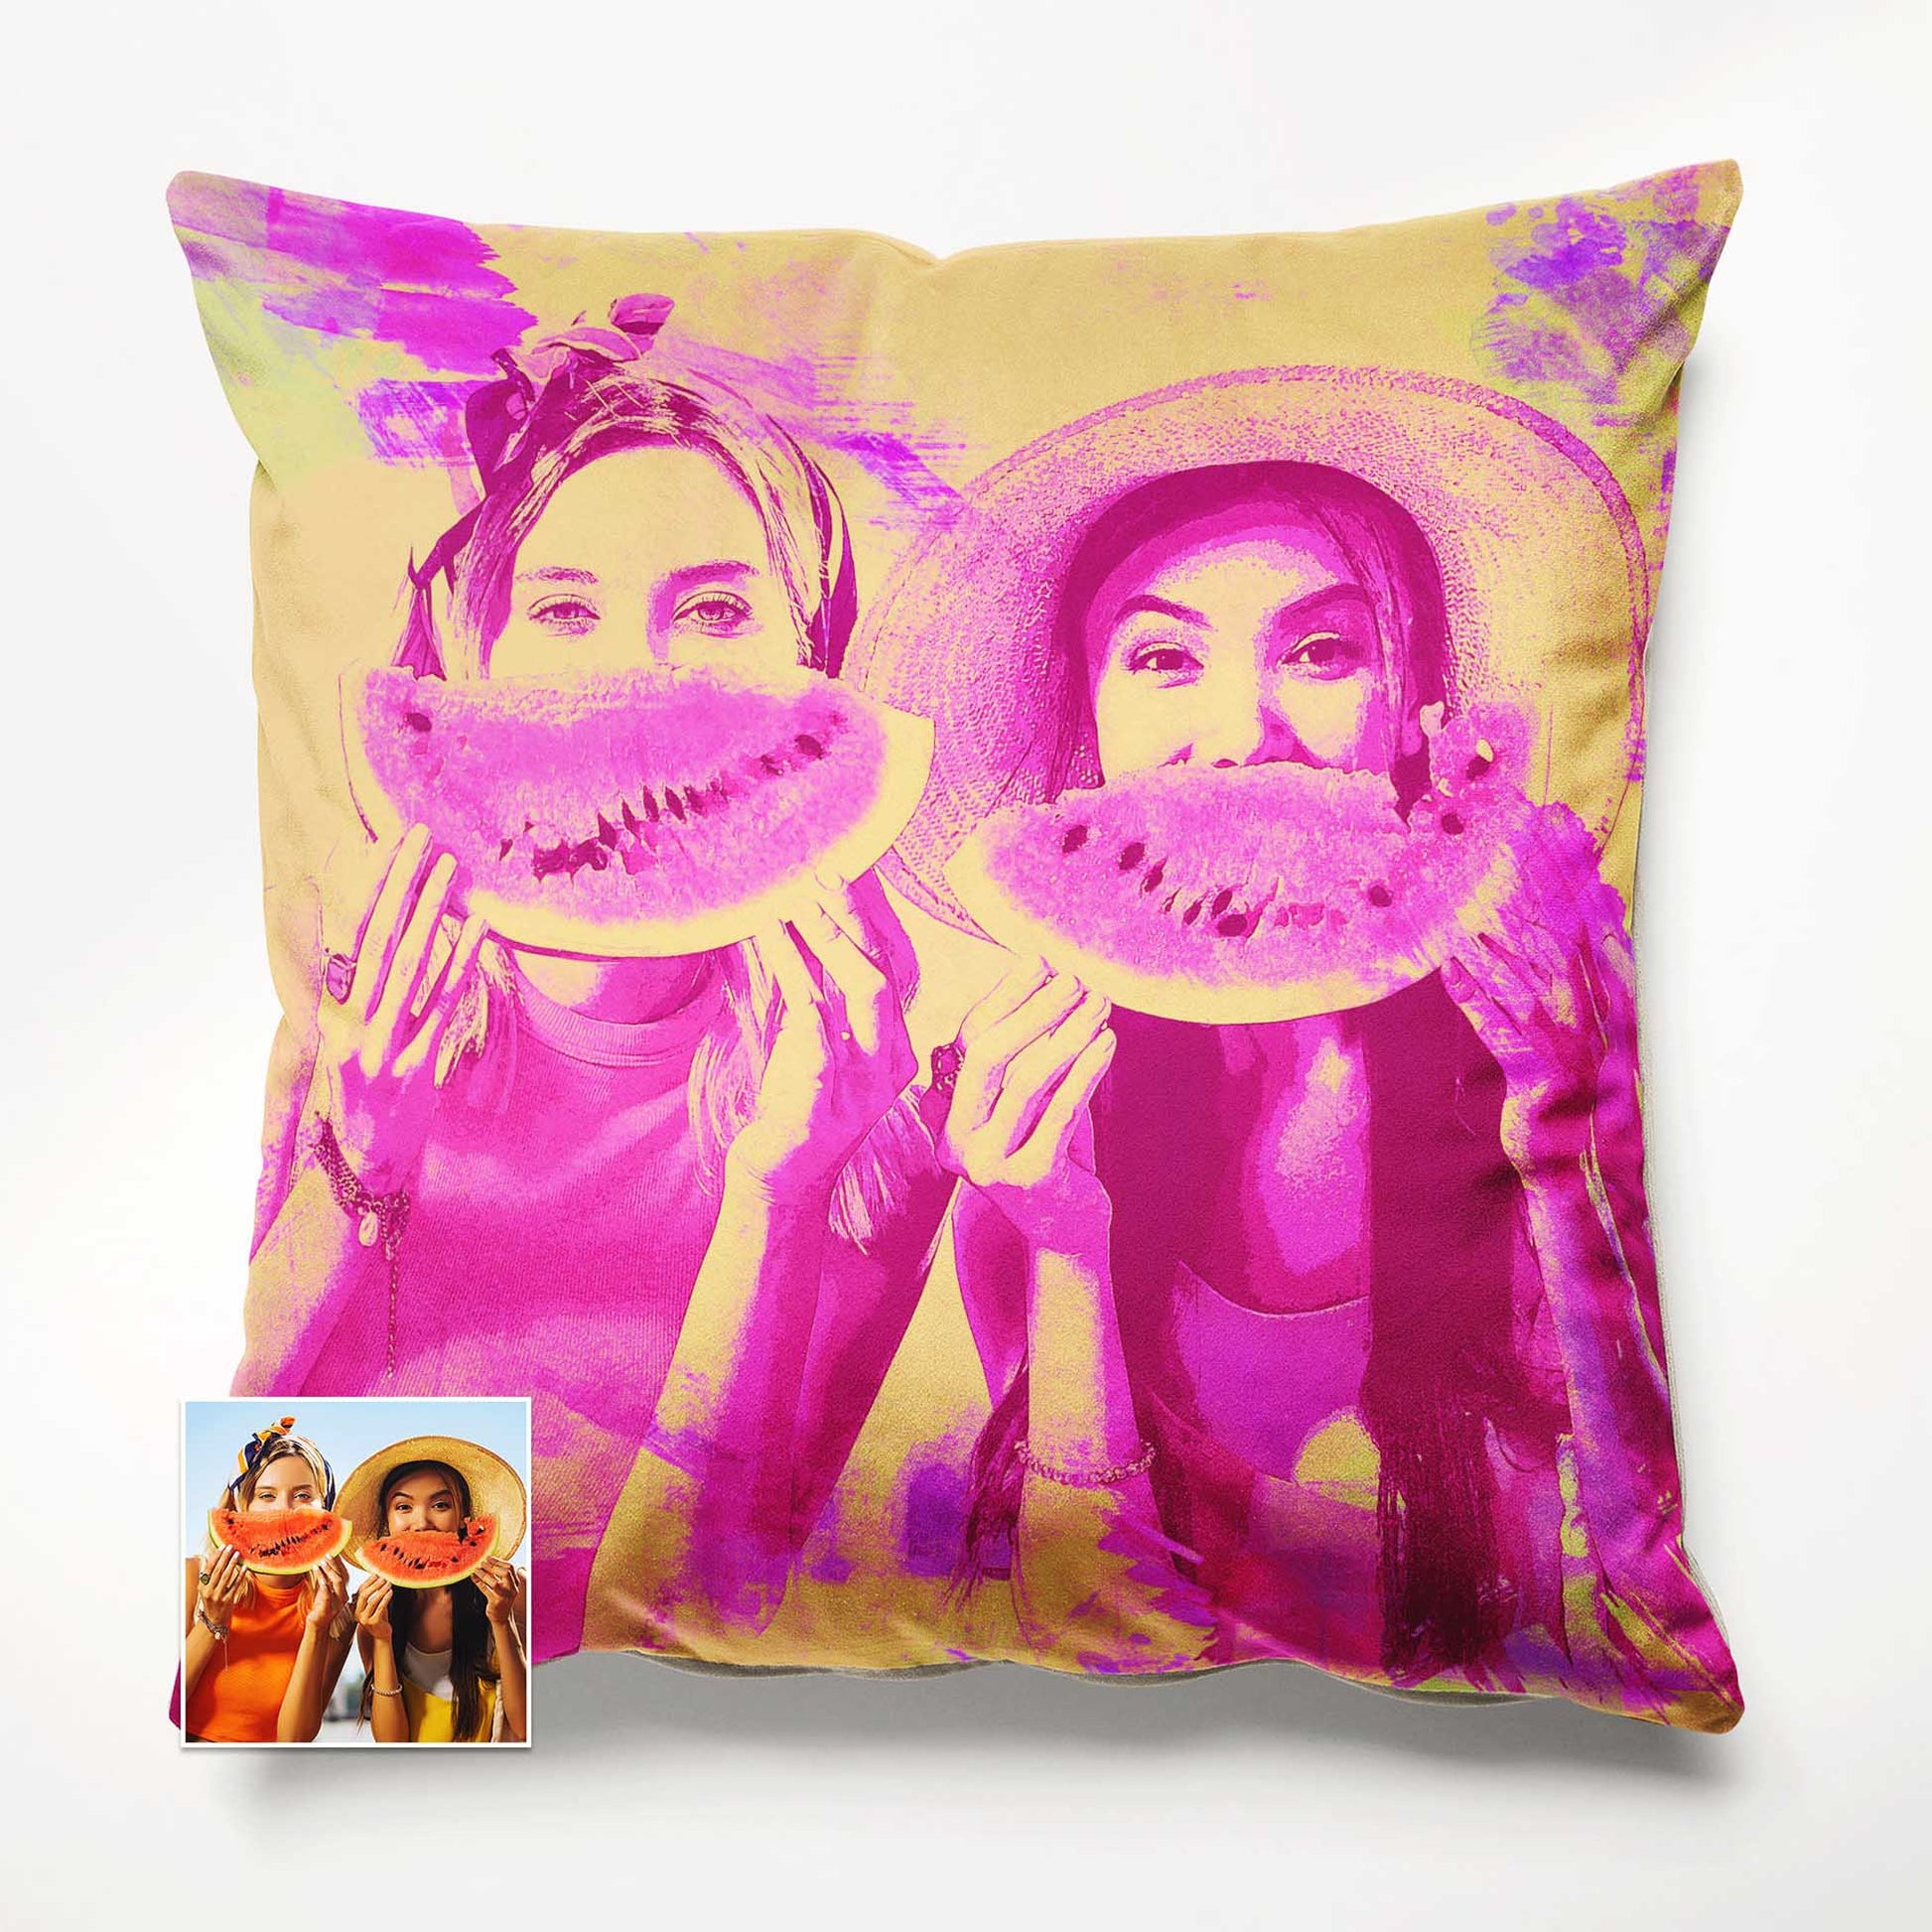 Embrace the allure of fine art with the Personalised Pink and Yellow Watercolour Cushion. Made from soft velvet and handcrafted with precision, this cushion showcases intricate brush strokes that bring your decor to life